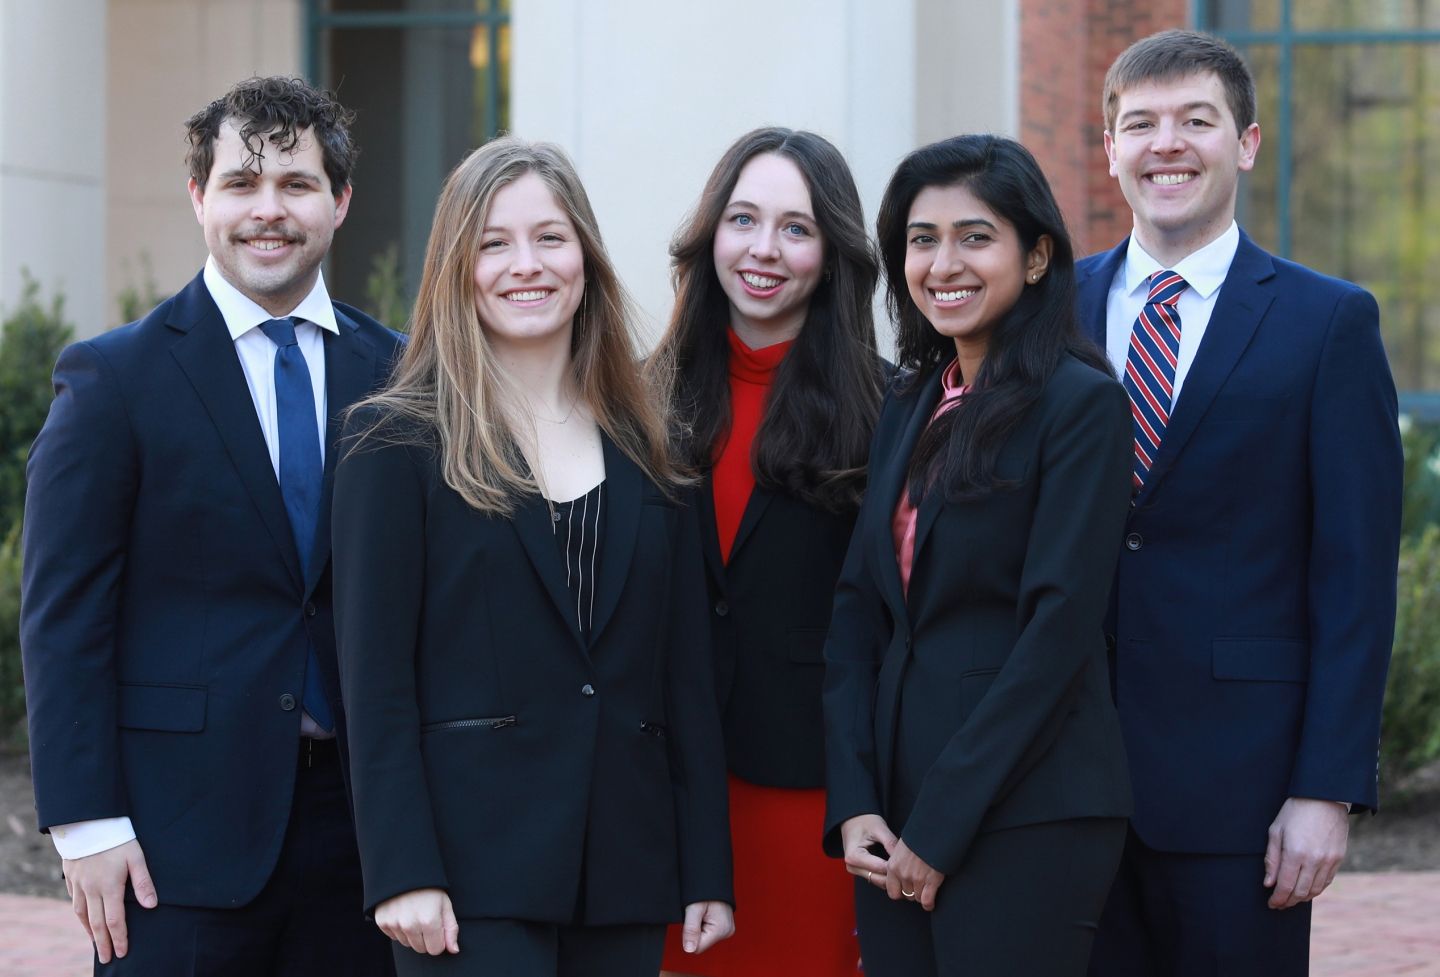 International and European Tax Moot Court competition team